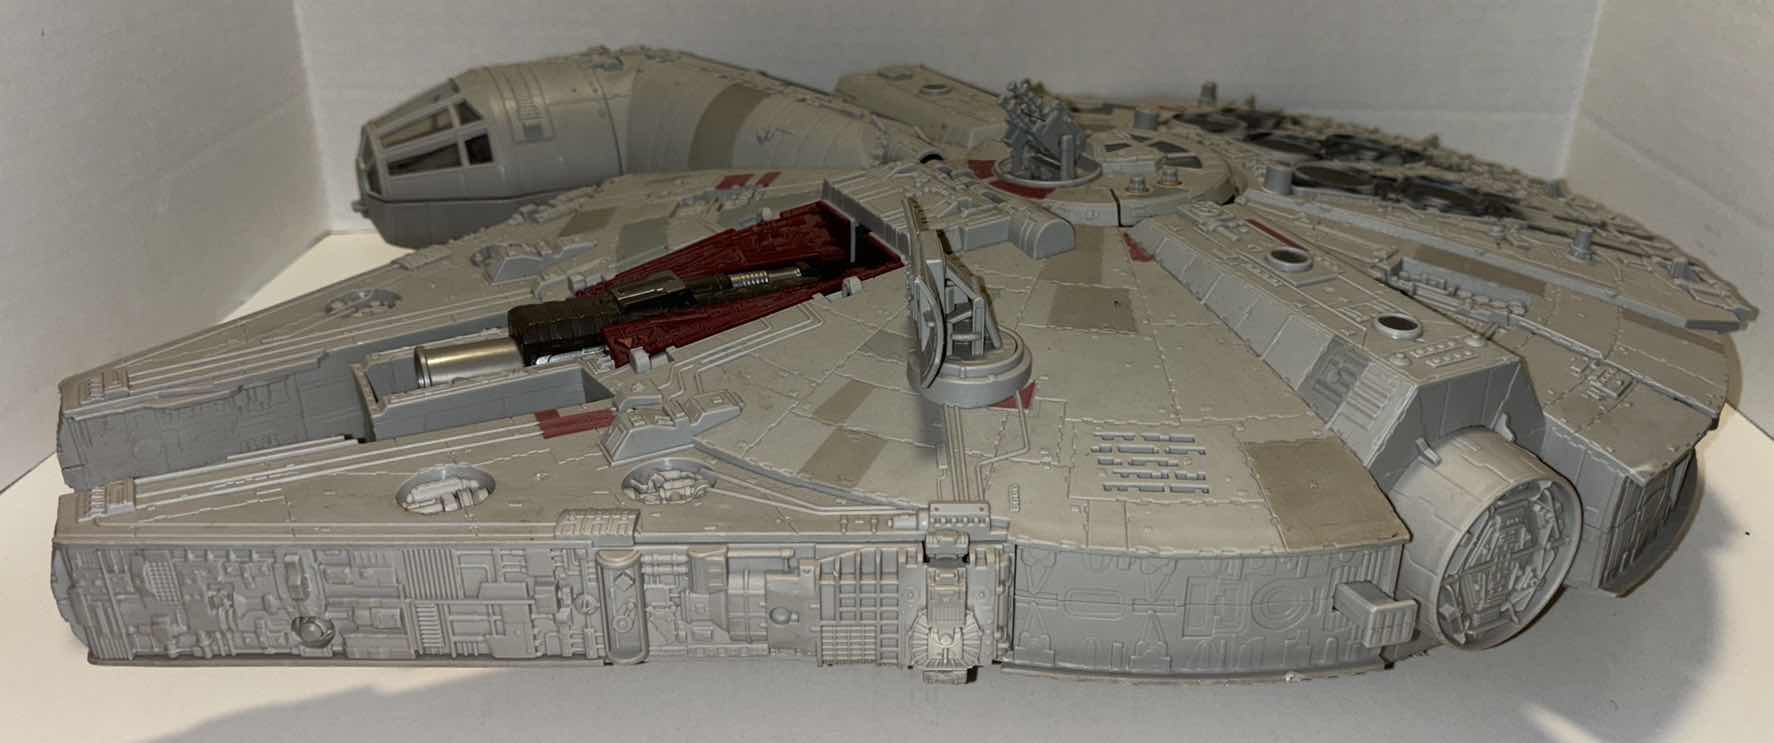 Photo 1 of HASBRO 2009 STAR WARS THE FORCE AWAKENS BATTLE ACTION MILLENNIUM FALCON (BATTERY OPERATED)